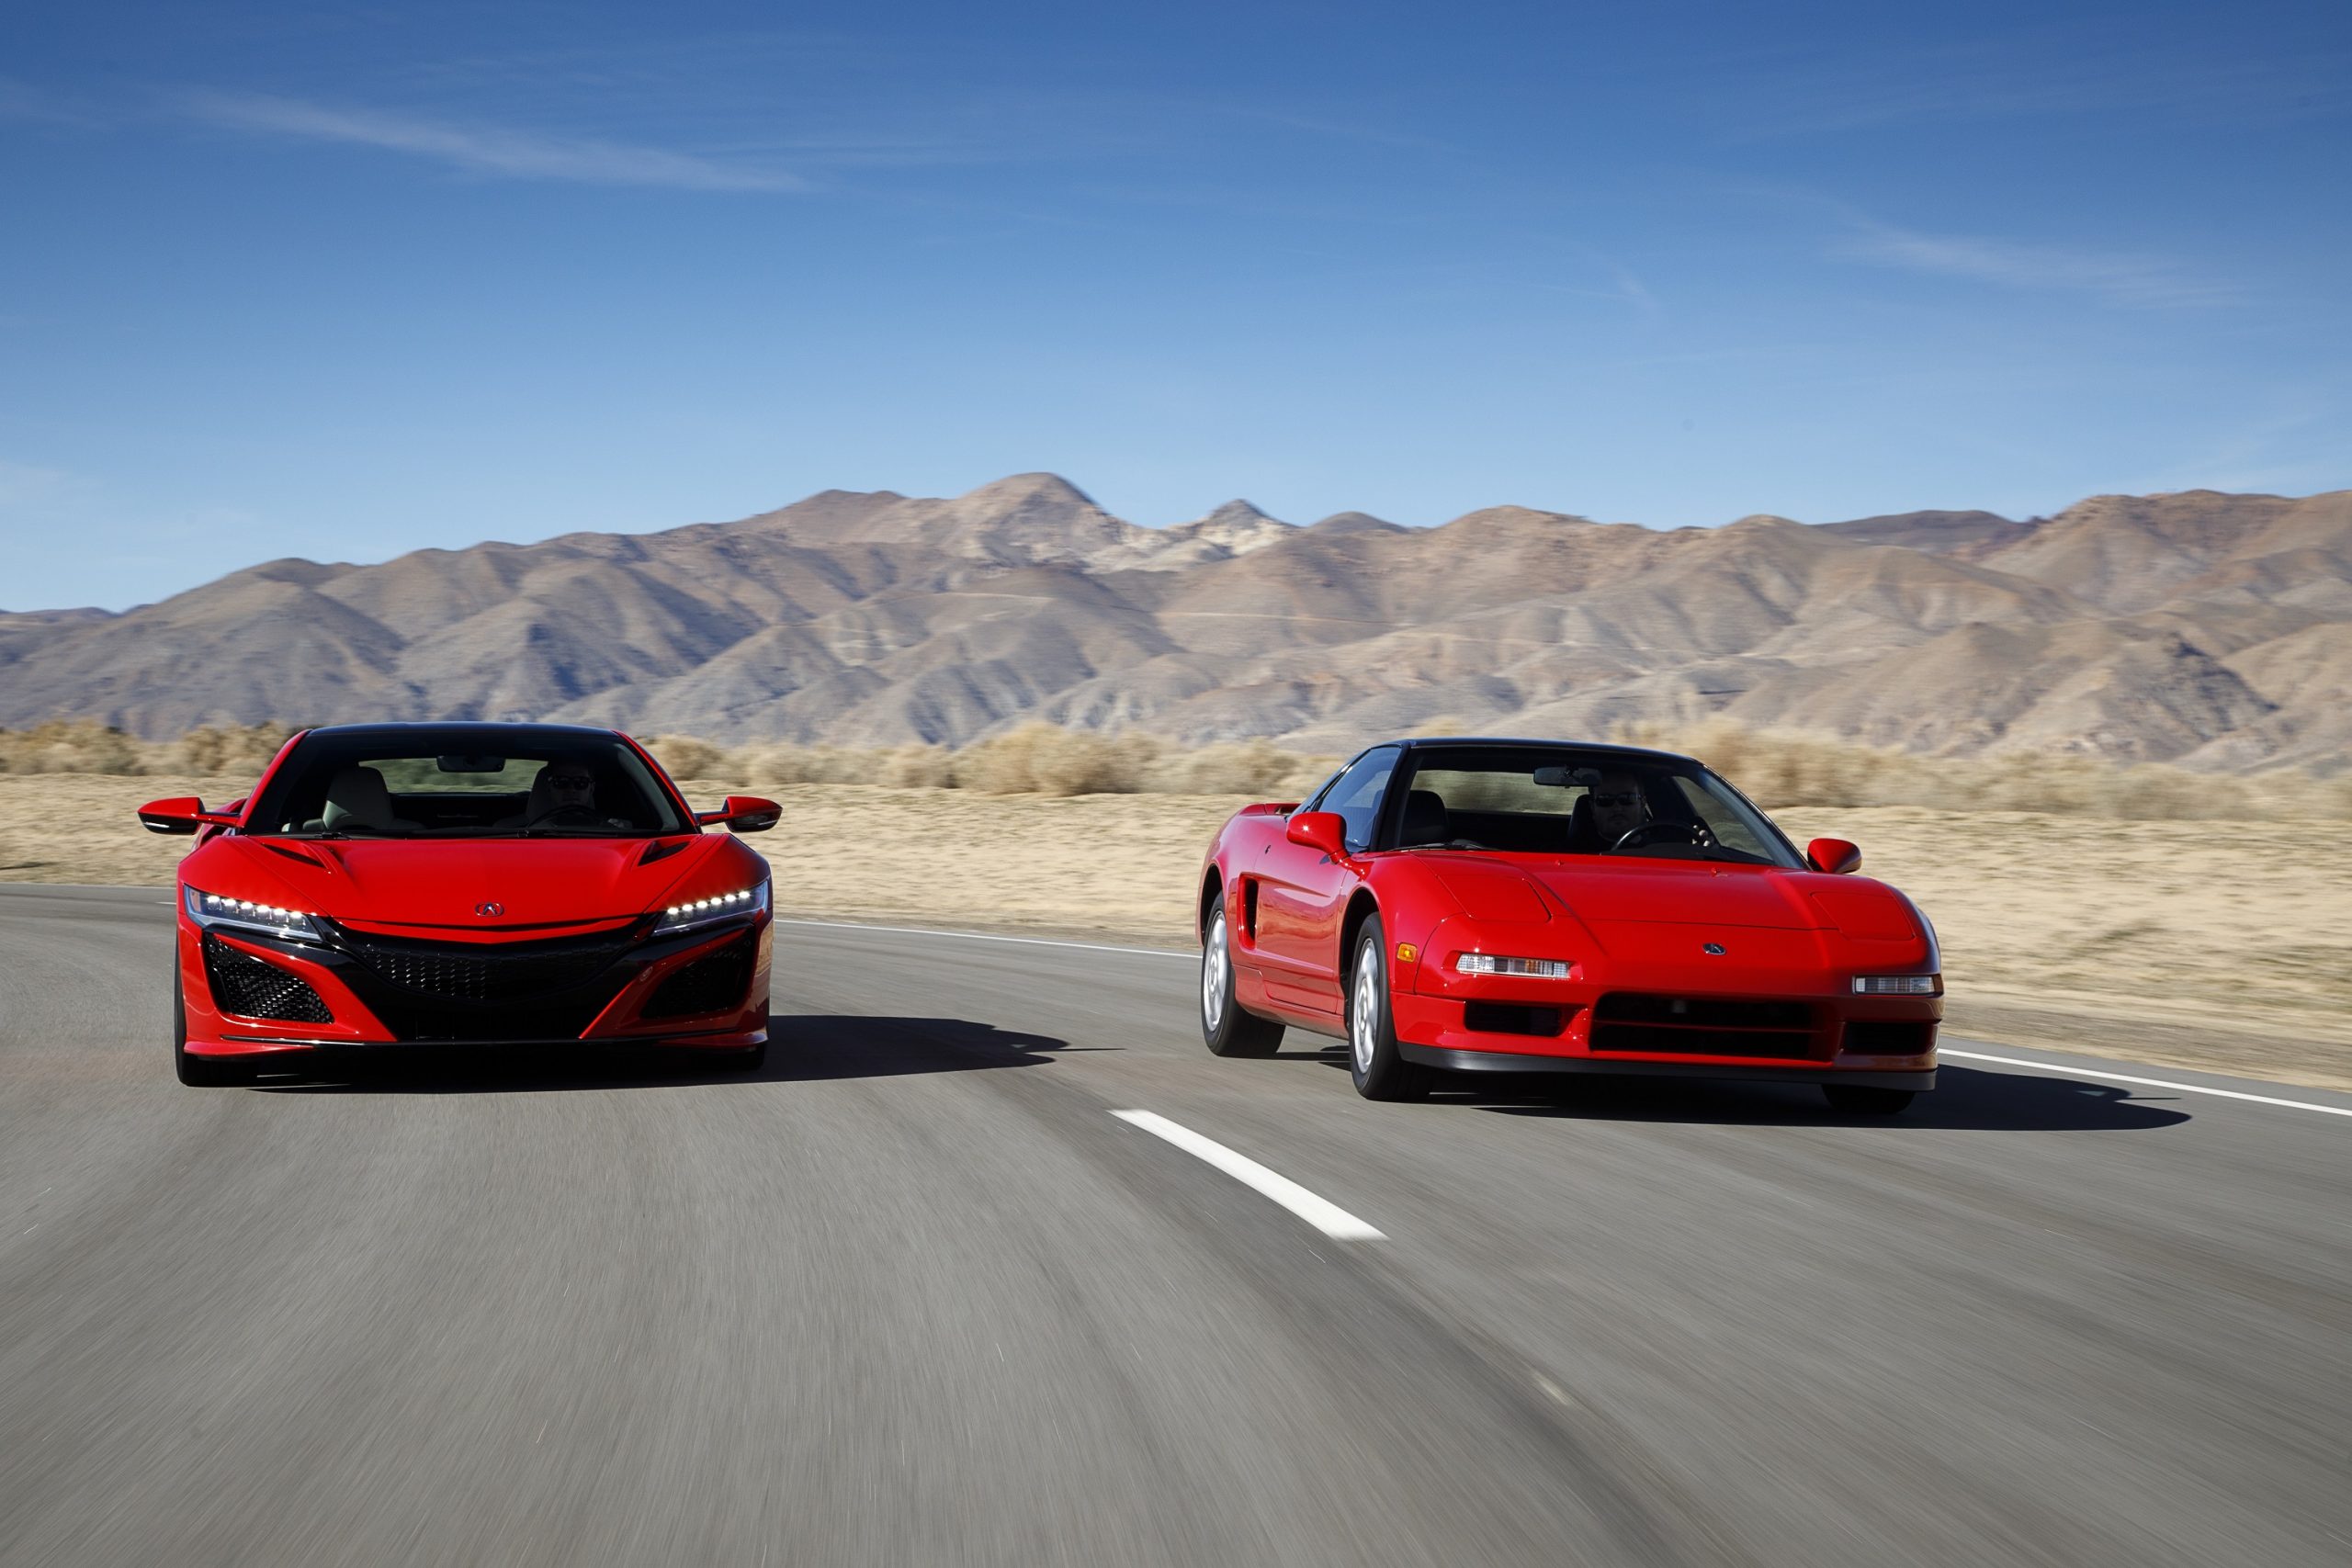 A pair of red Acura NSX models, one new and one old, shot from the front while in motion